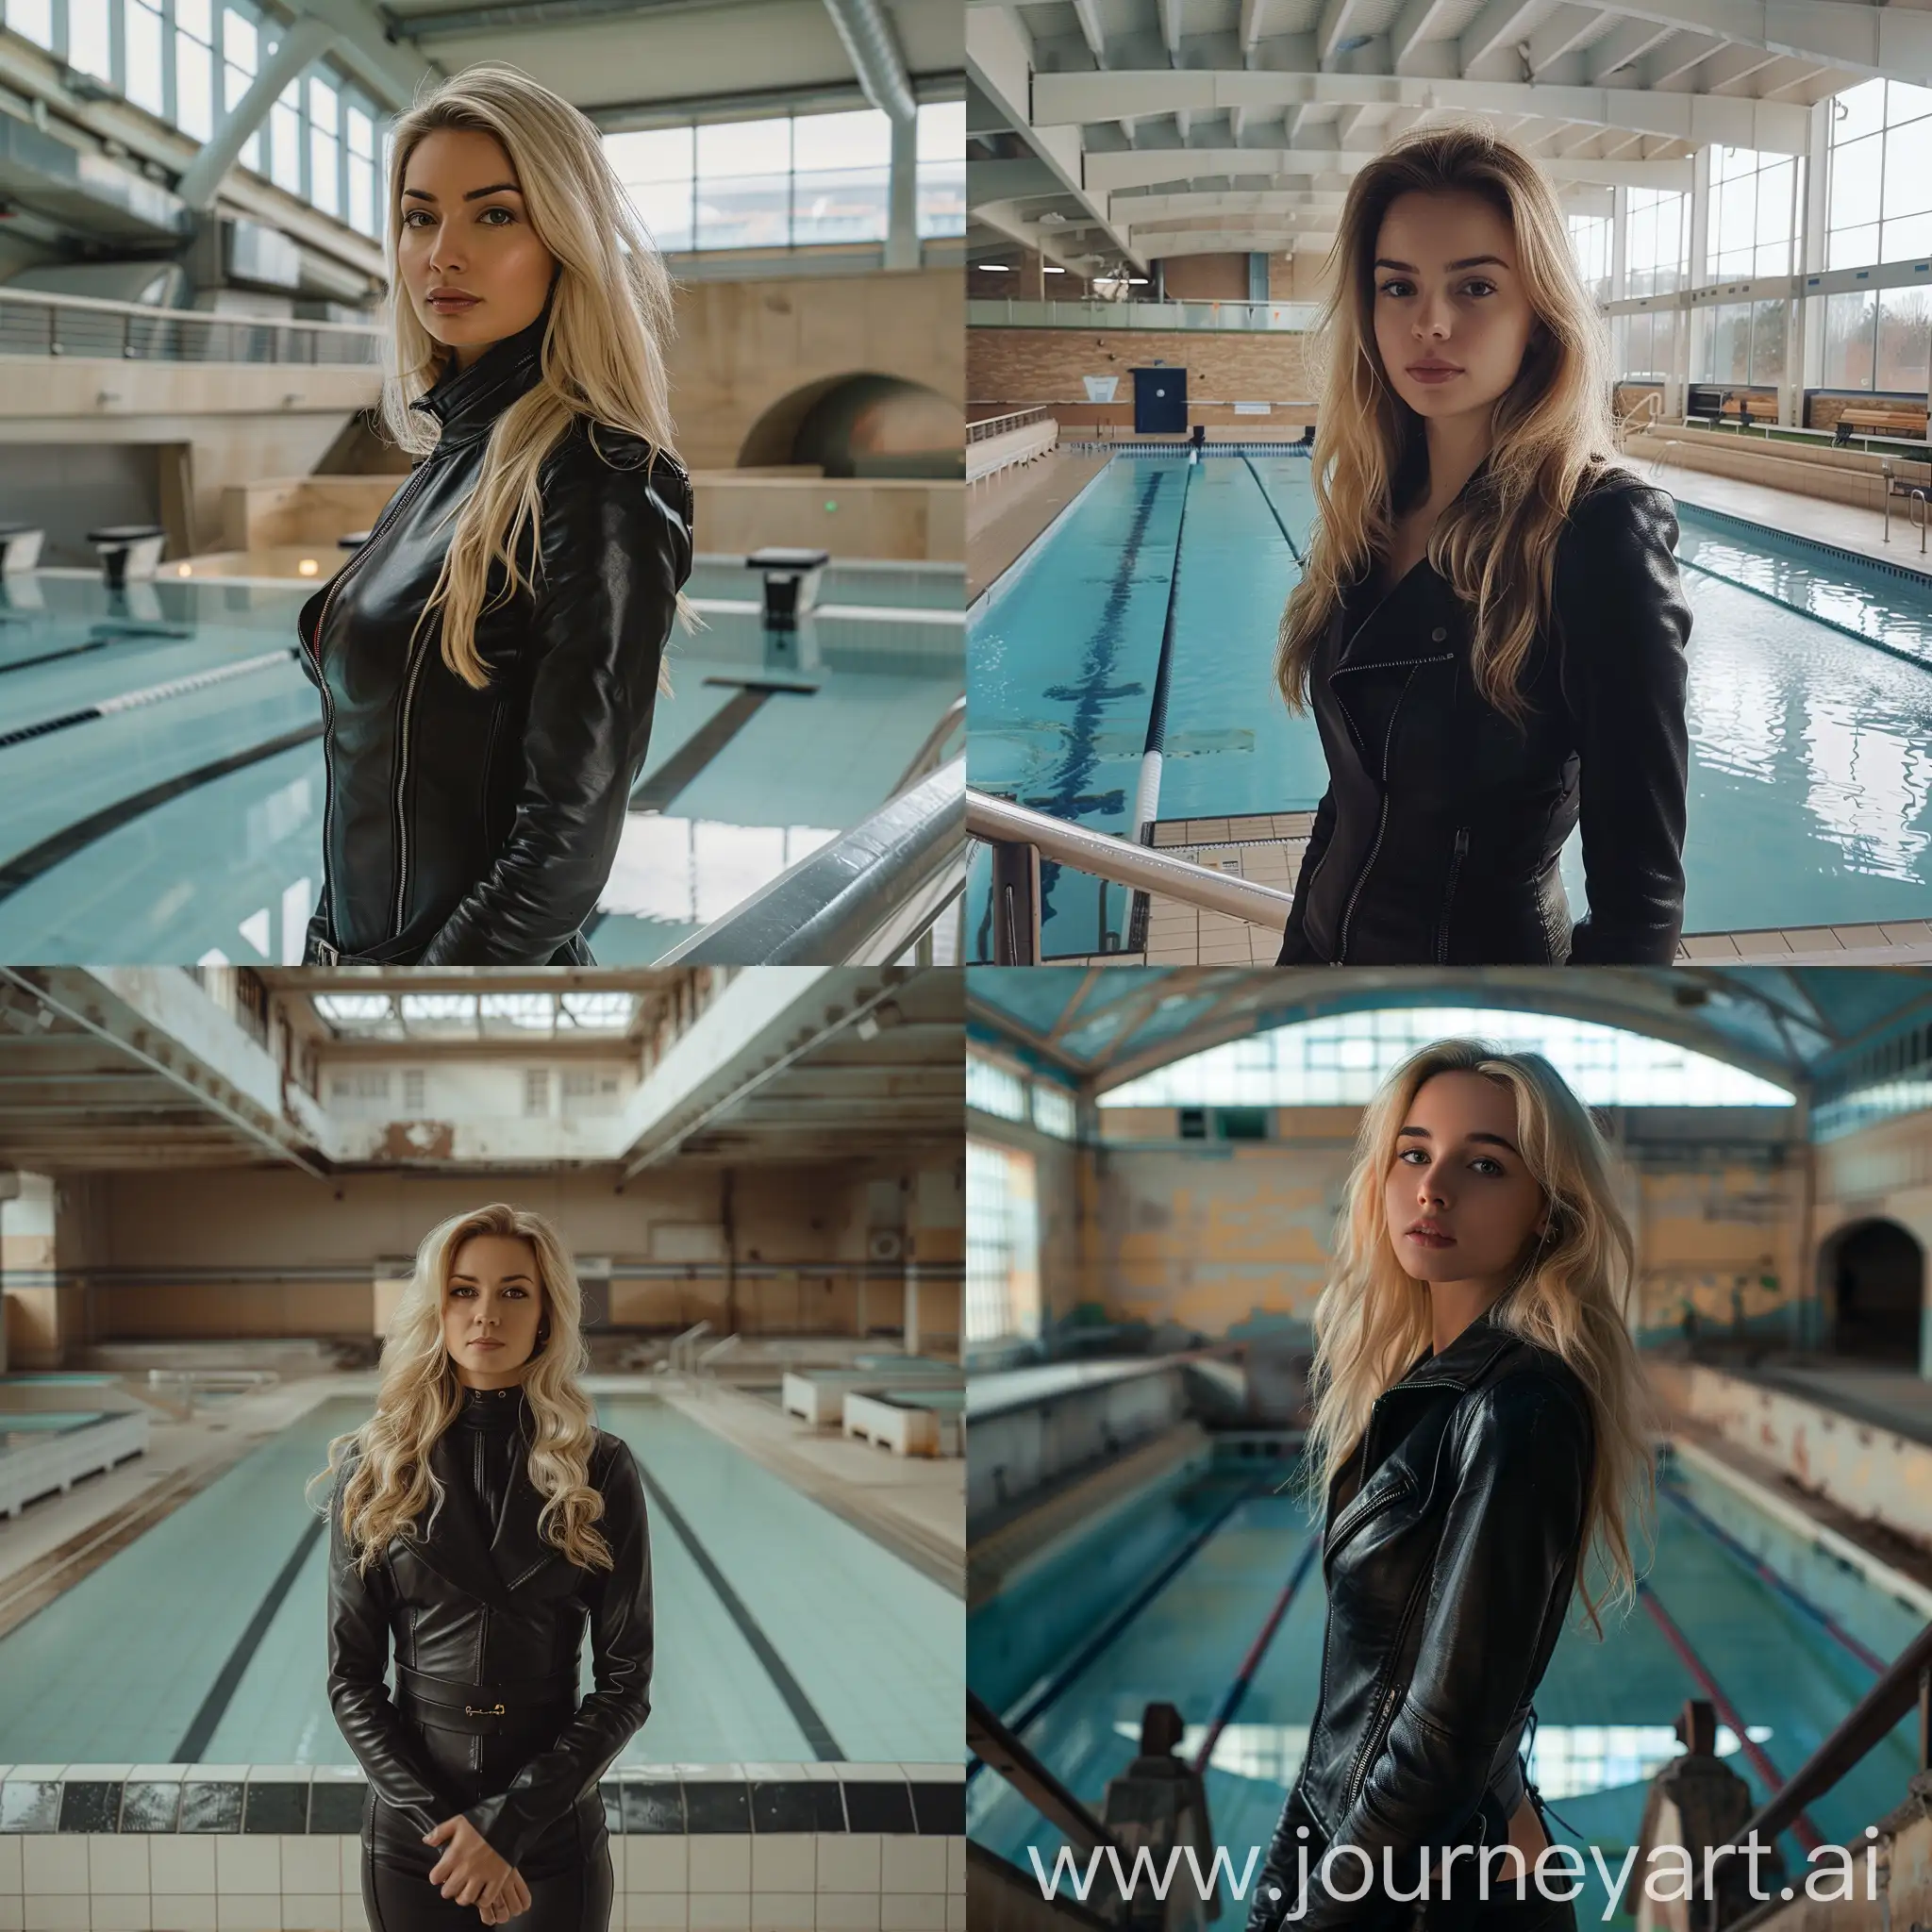 Stylish-Blonde-Woman-in-Black-Leather-at-Indoor-Public-Swimming-Pool